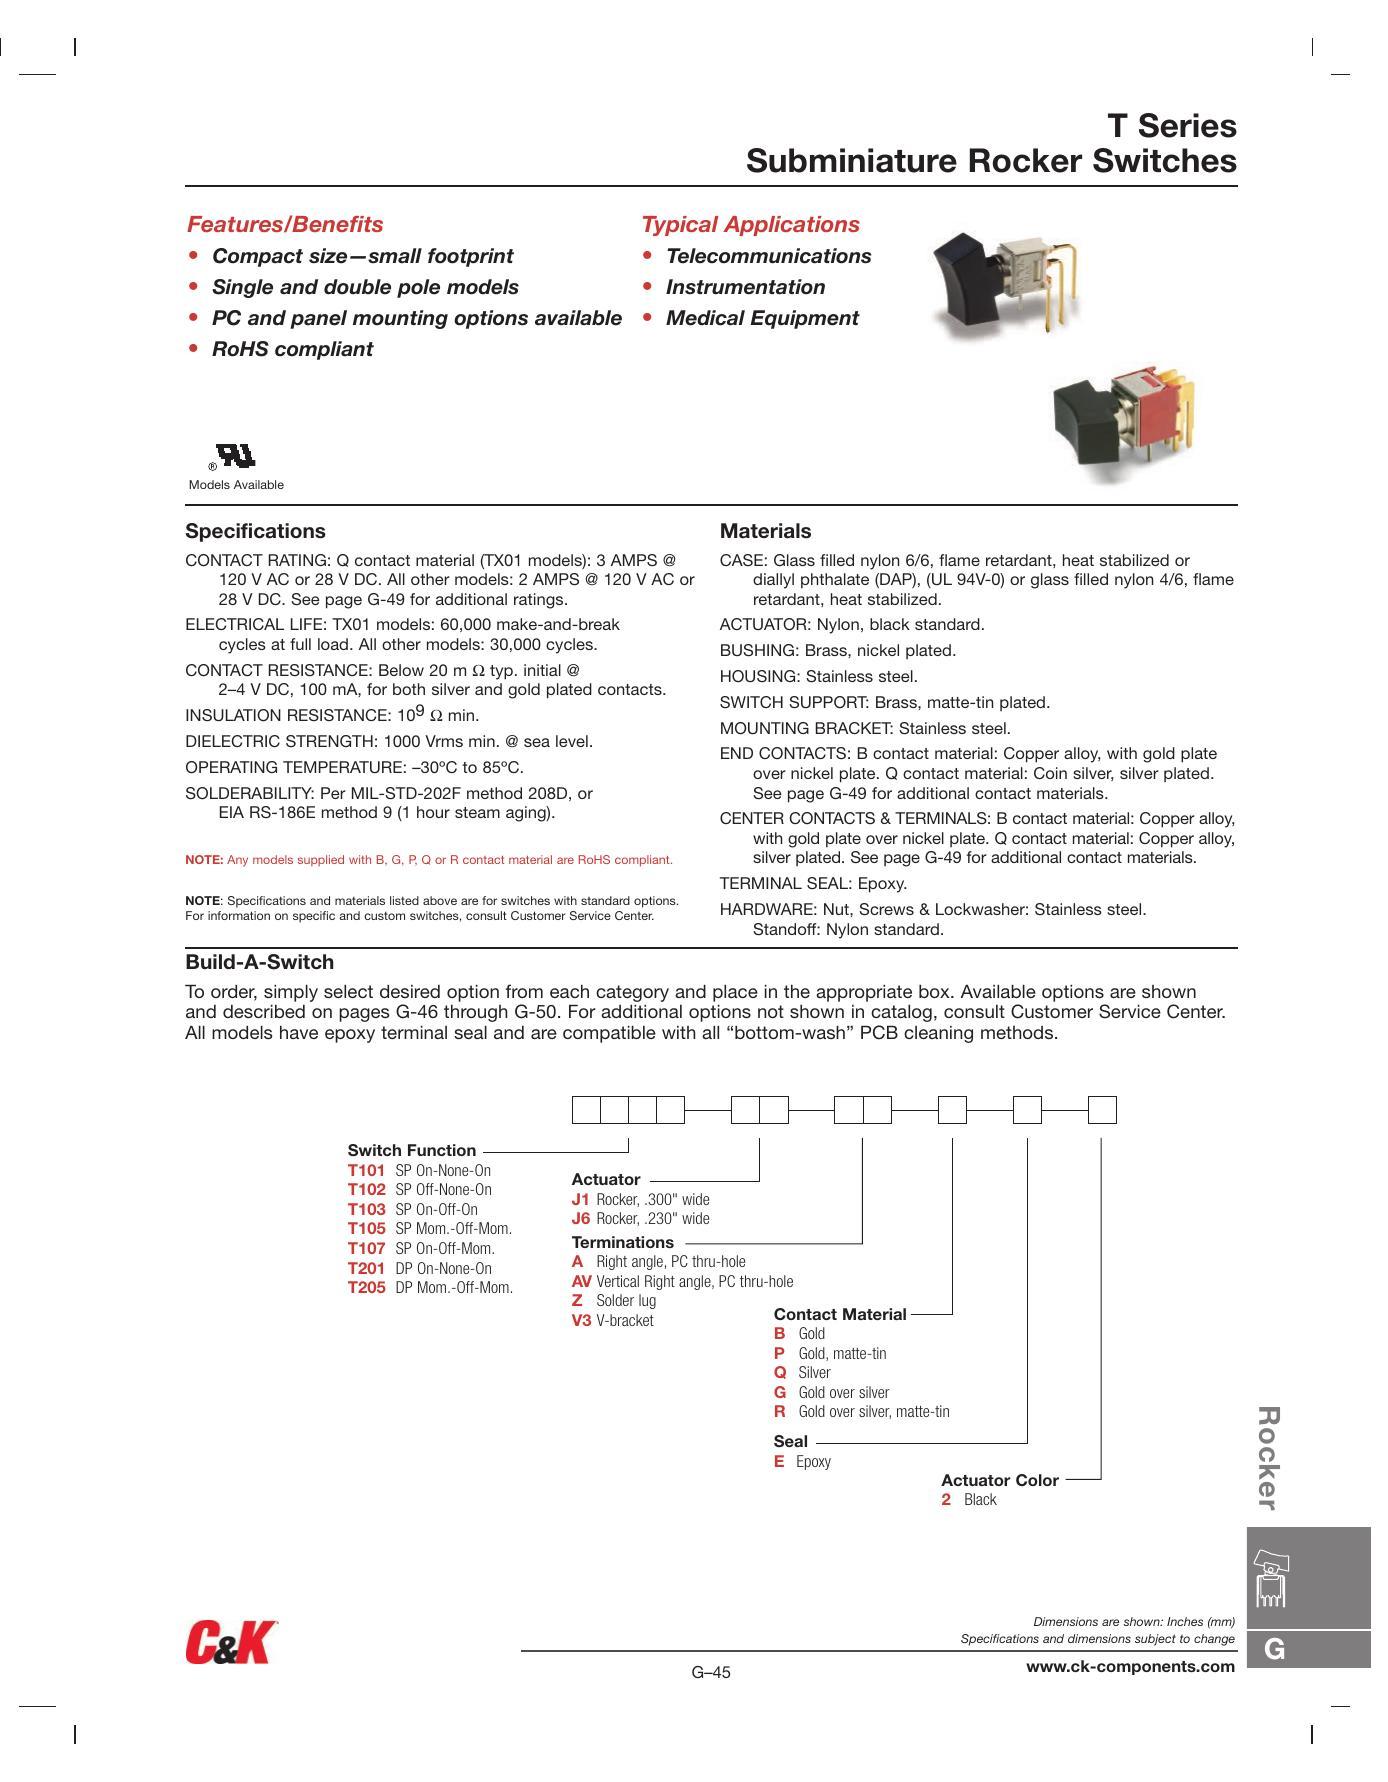 t-series-subminiature-rocker-switches.pdf